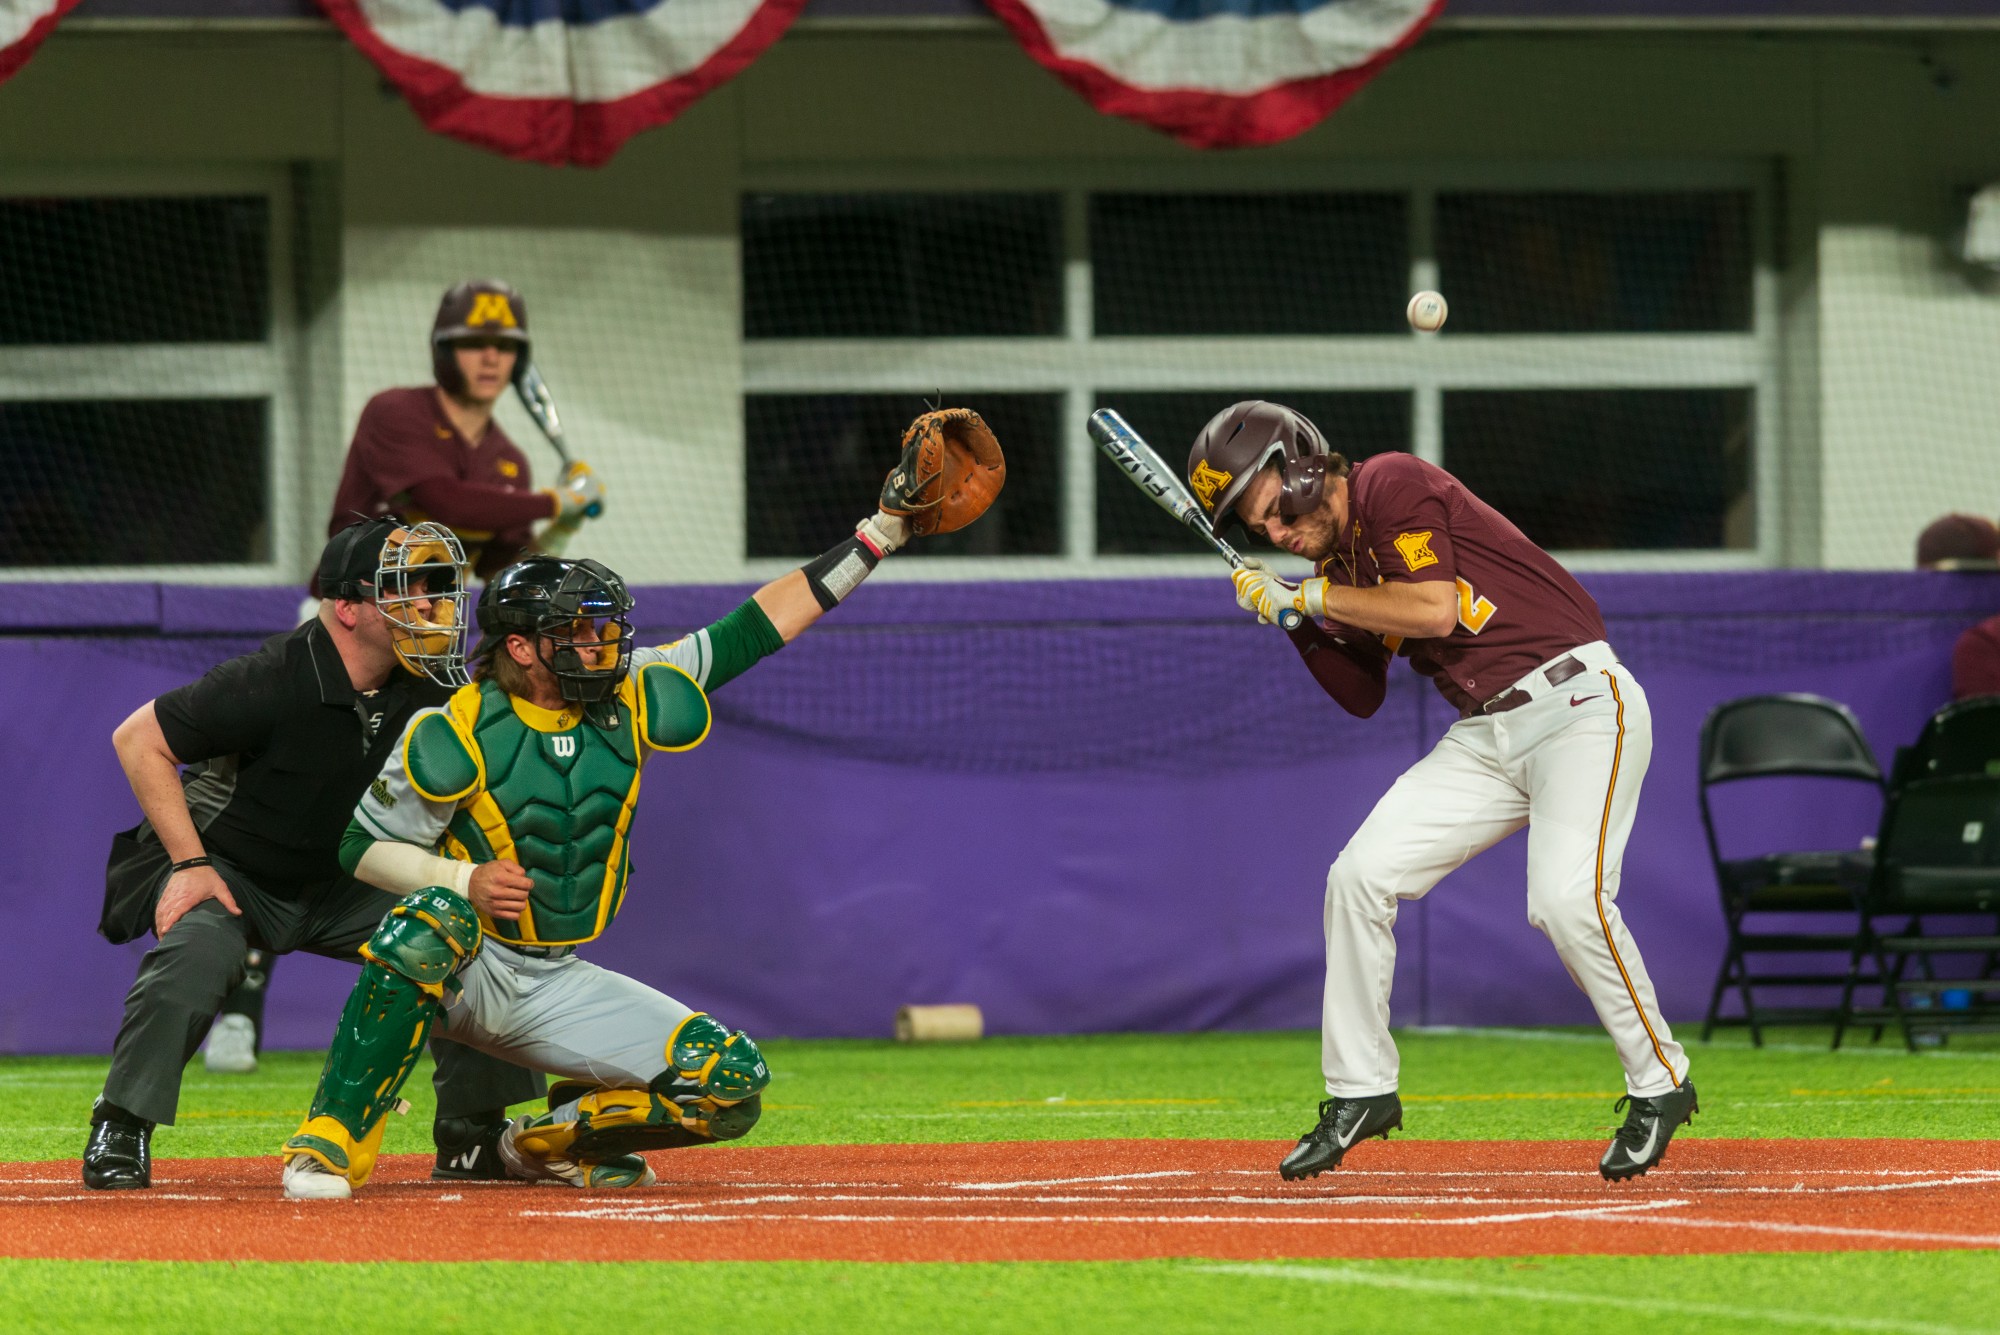 Gophers Infielder Zack Raabe is struck by a pitch at U.S. Bank Stadium on Tuesday, March 3, 2020.